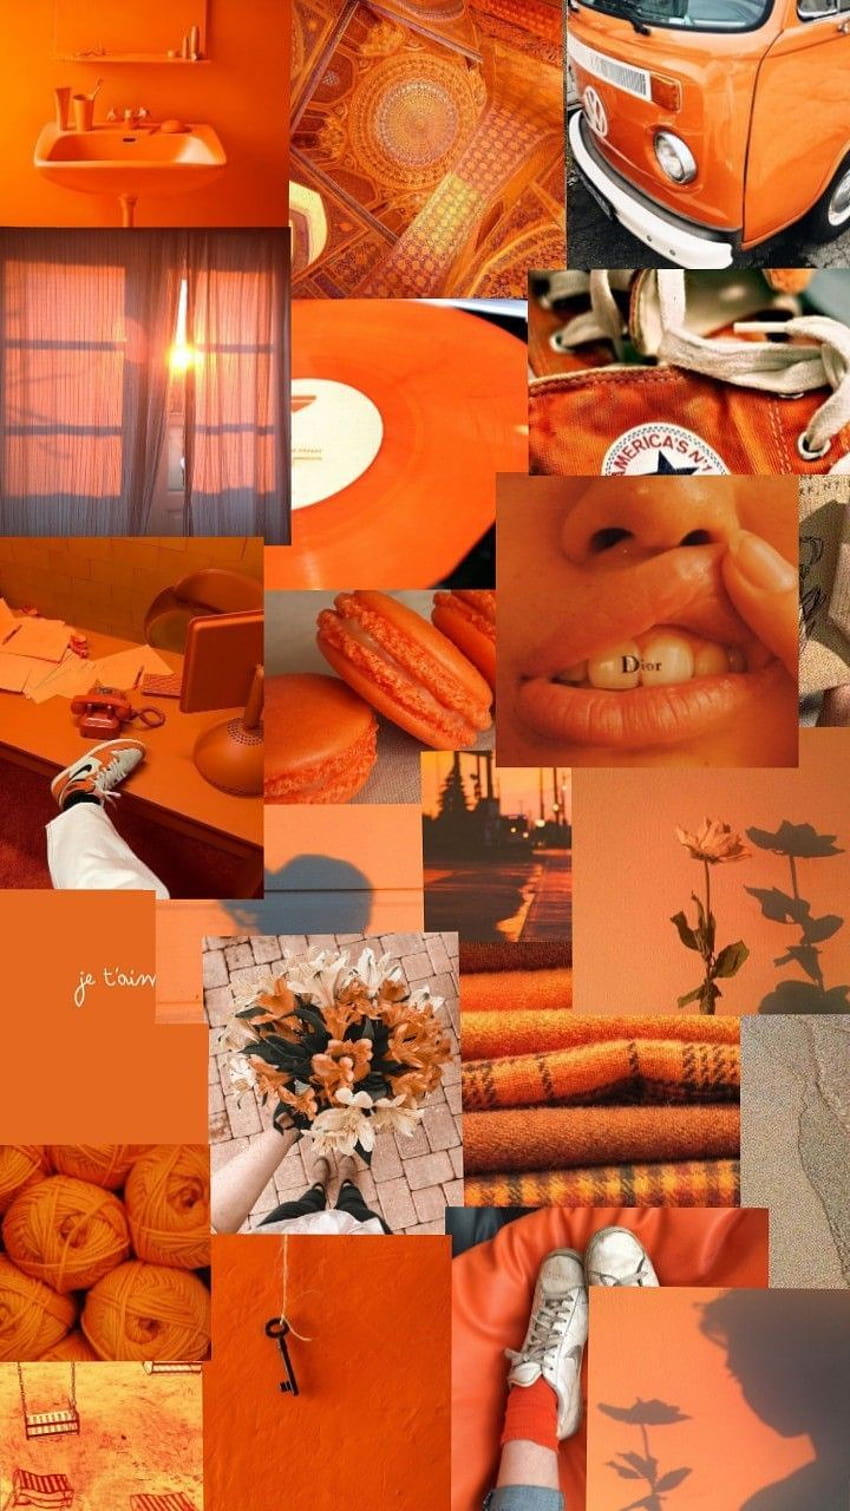 A collage of orange pictures with different images - Pastel orange